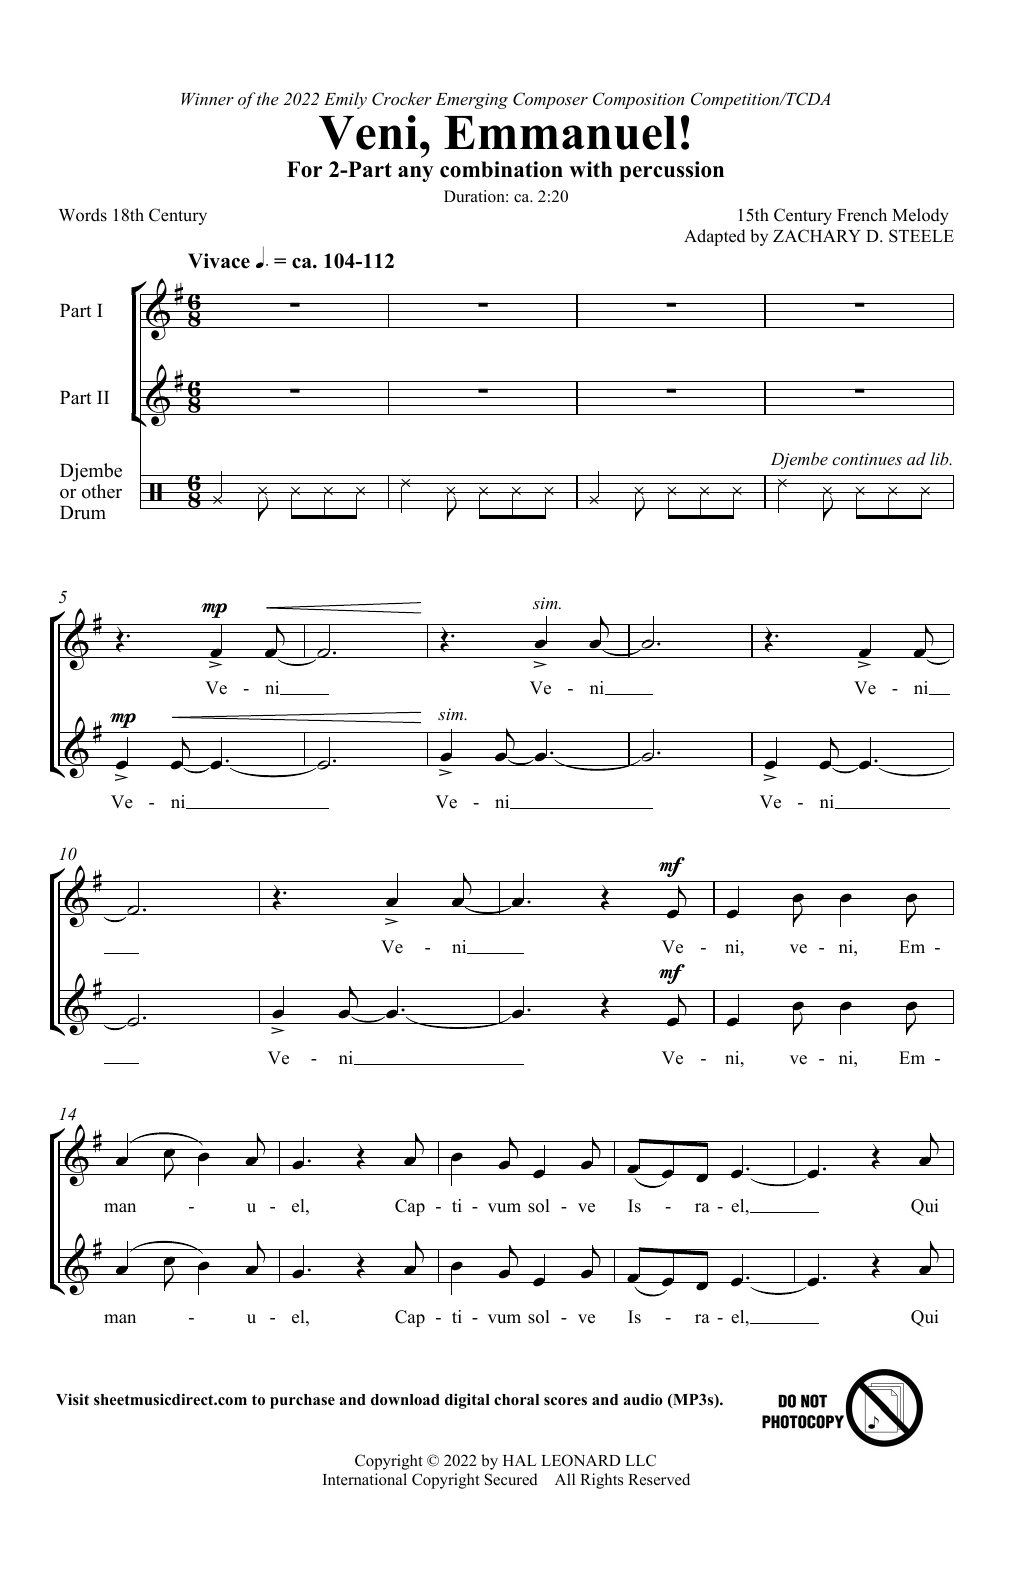 Download 15th Century French Melody Veni, Emmanuel! (arr. Zachary Steele) Sheet Music